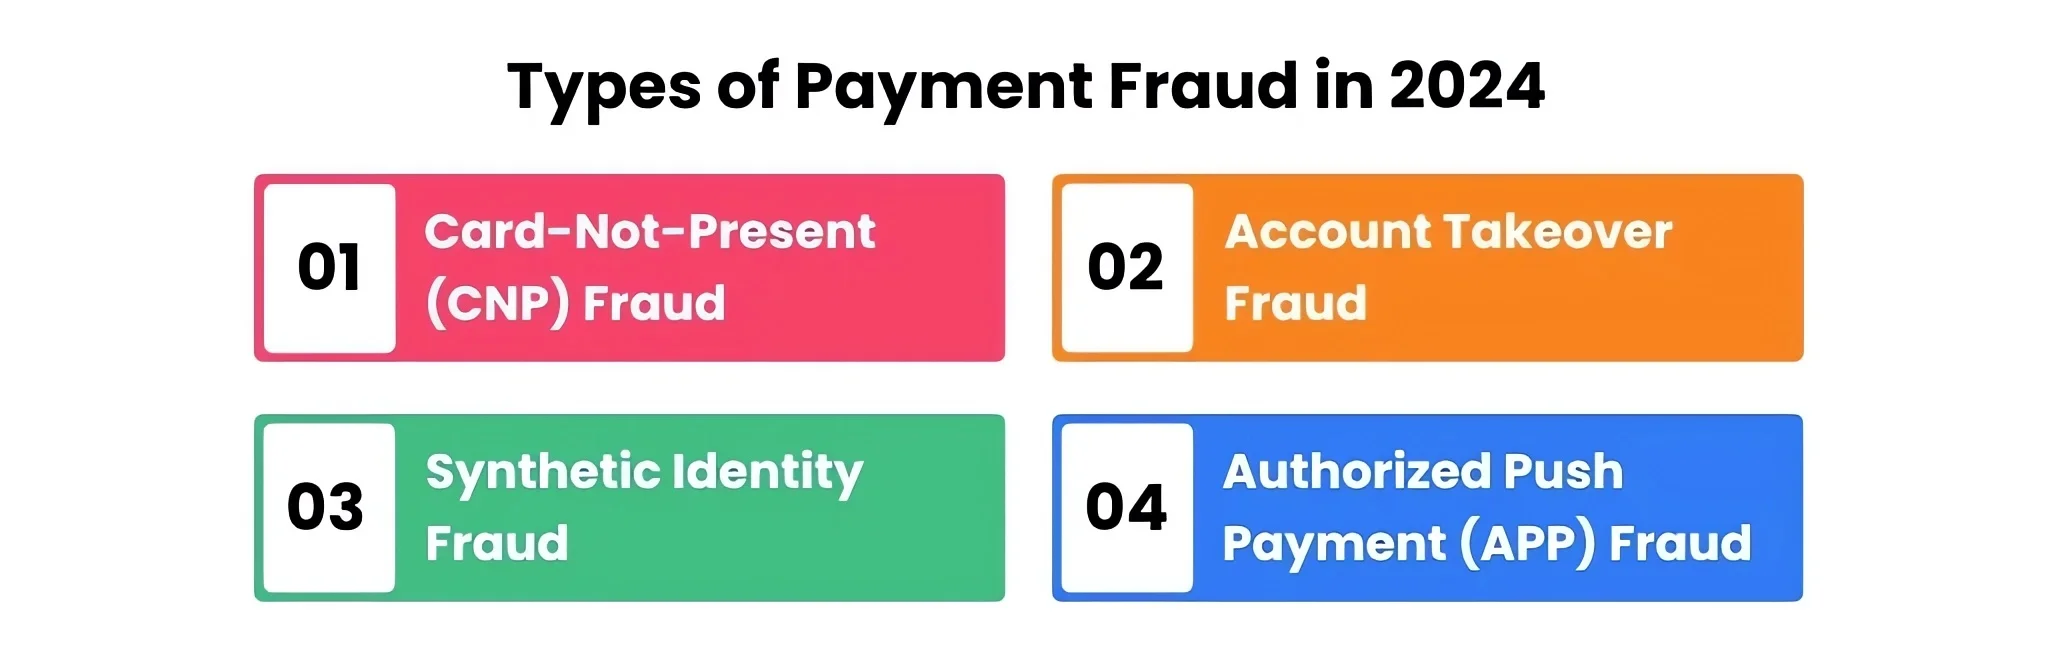 Types of Payment Fraud